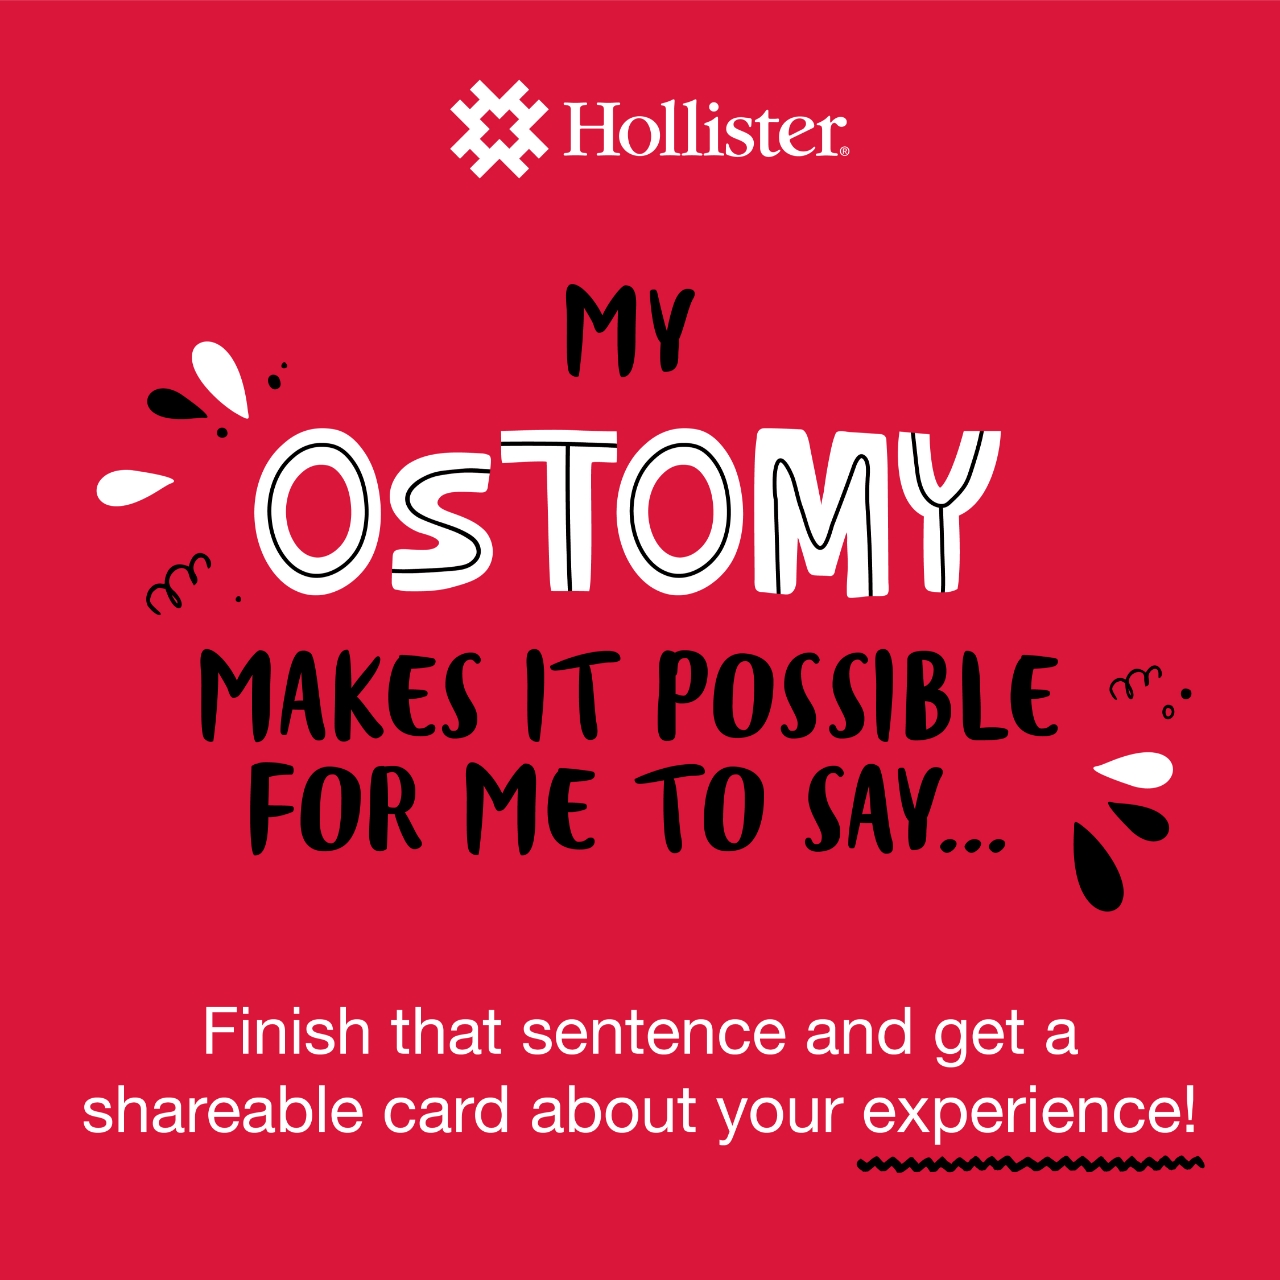 Life affirmation social card: “My OSTOMY makes it possible for me to say…”. Finish the sentence and get a shareable card about your experience!